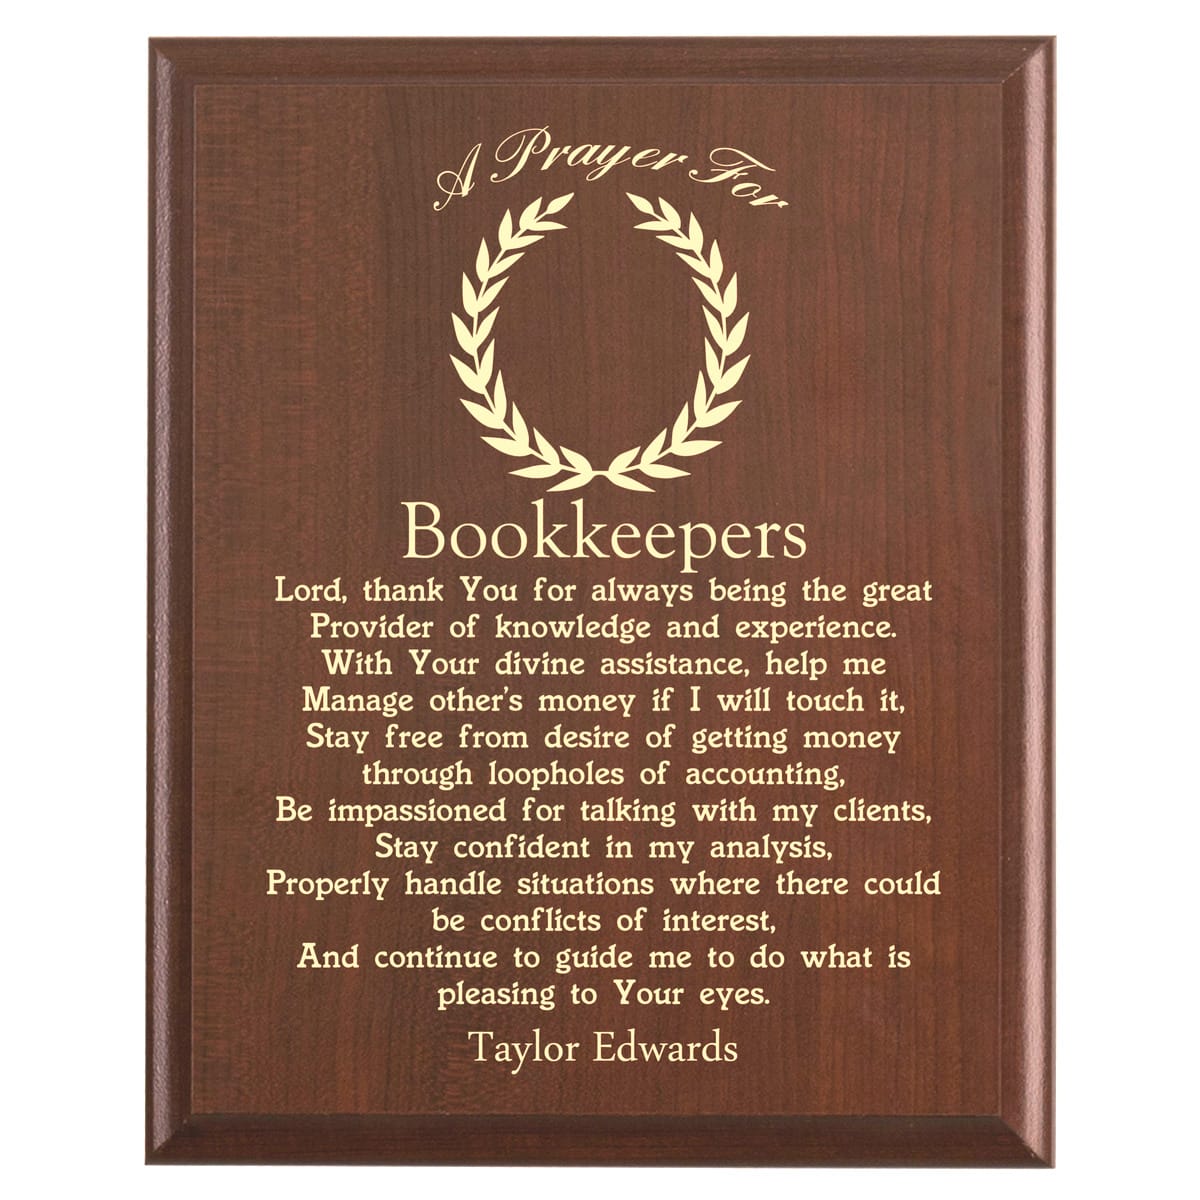 Plaque photo: Bookkeepers Prayer Plaque design with free personalization. Wood style finish with customized text.